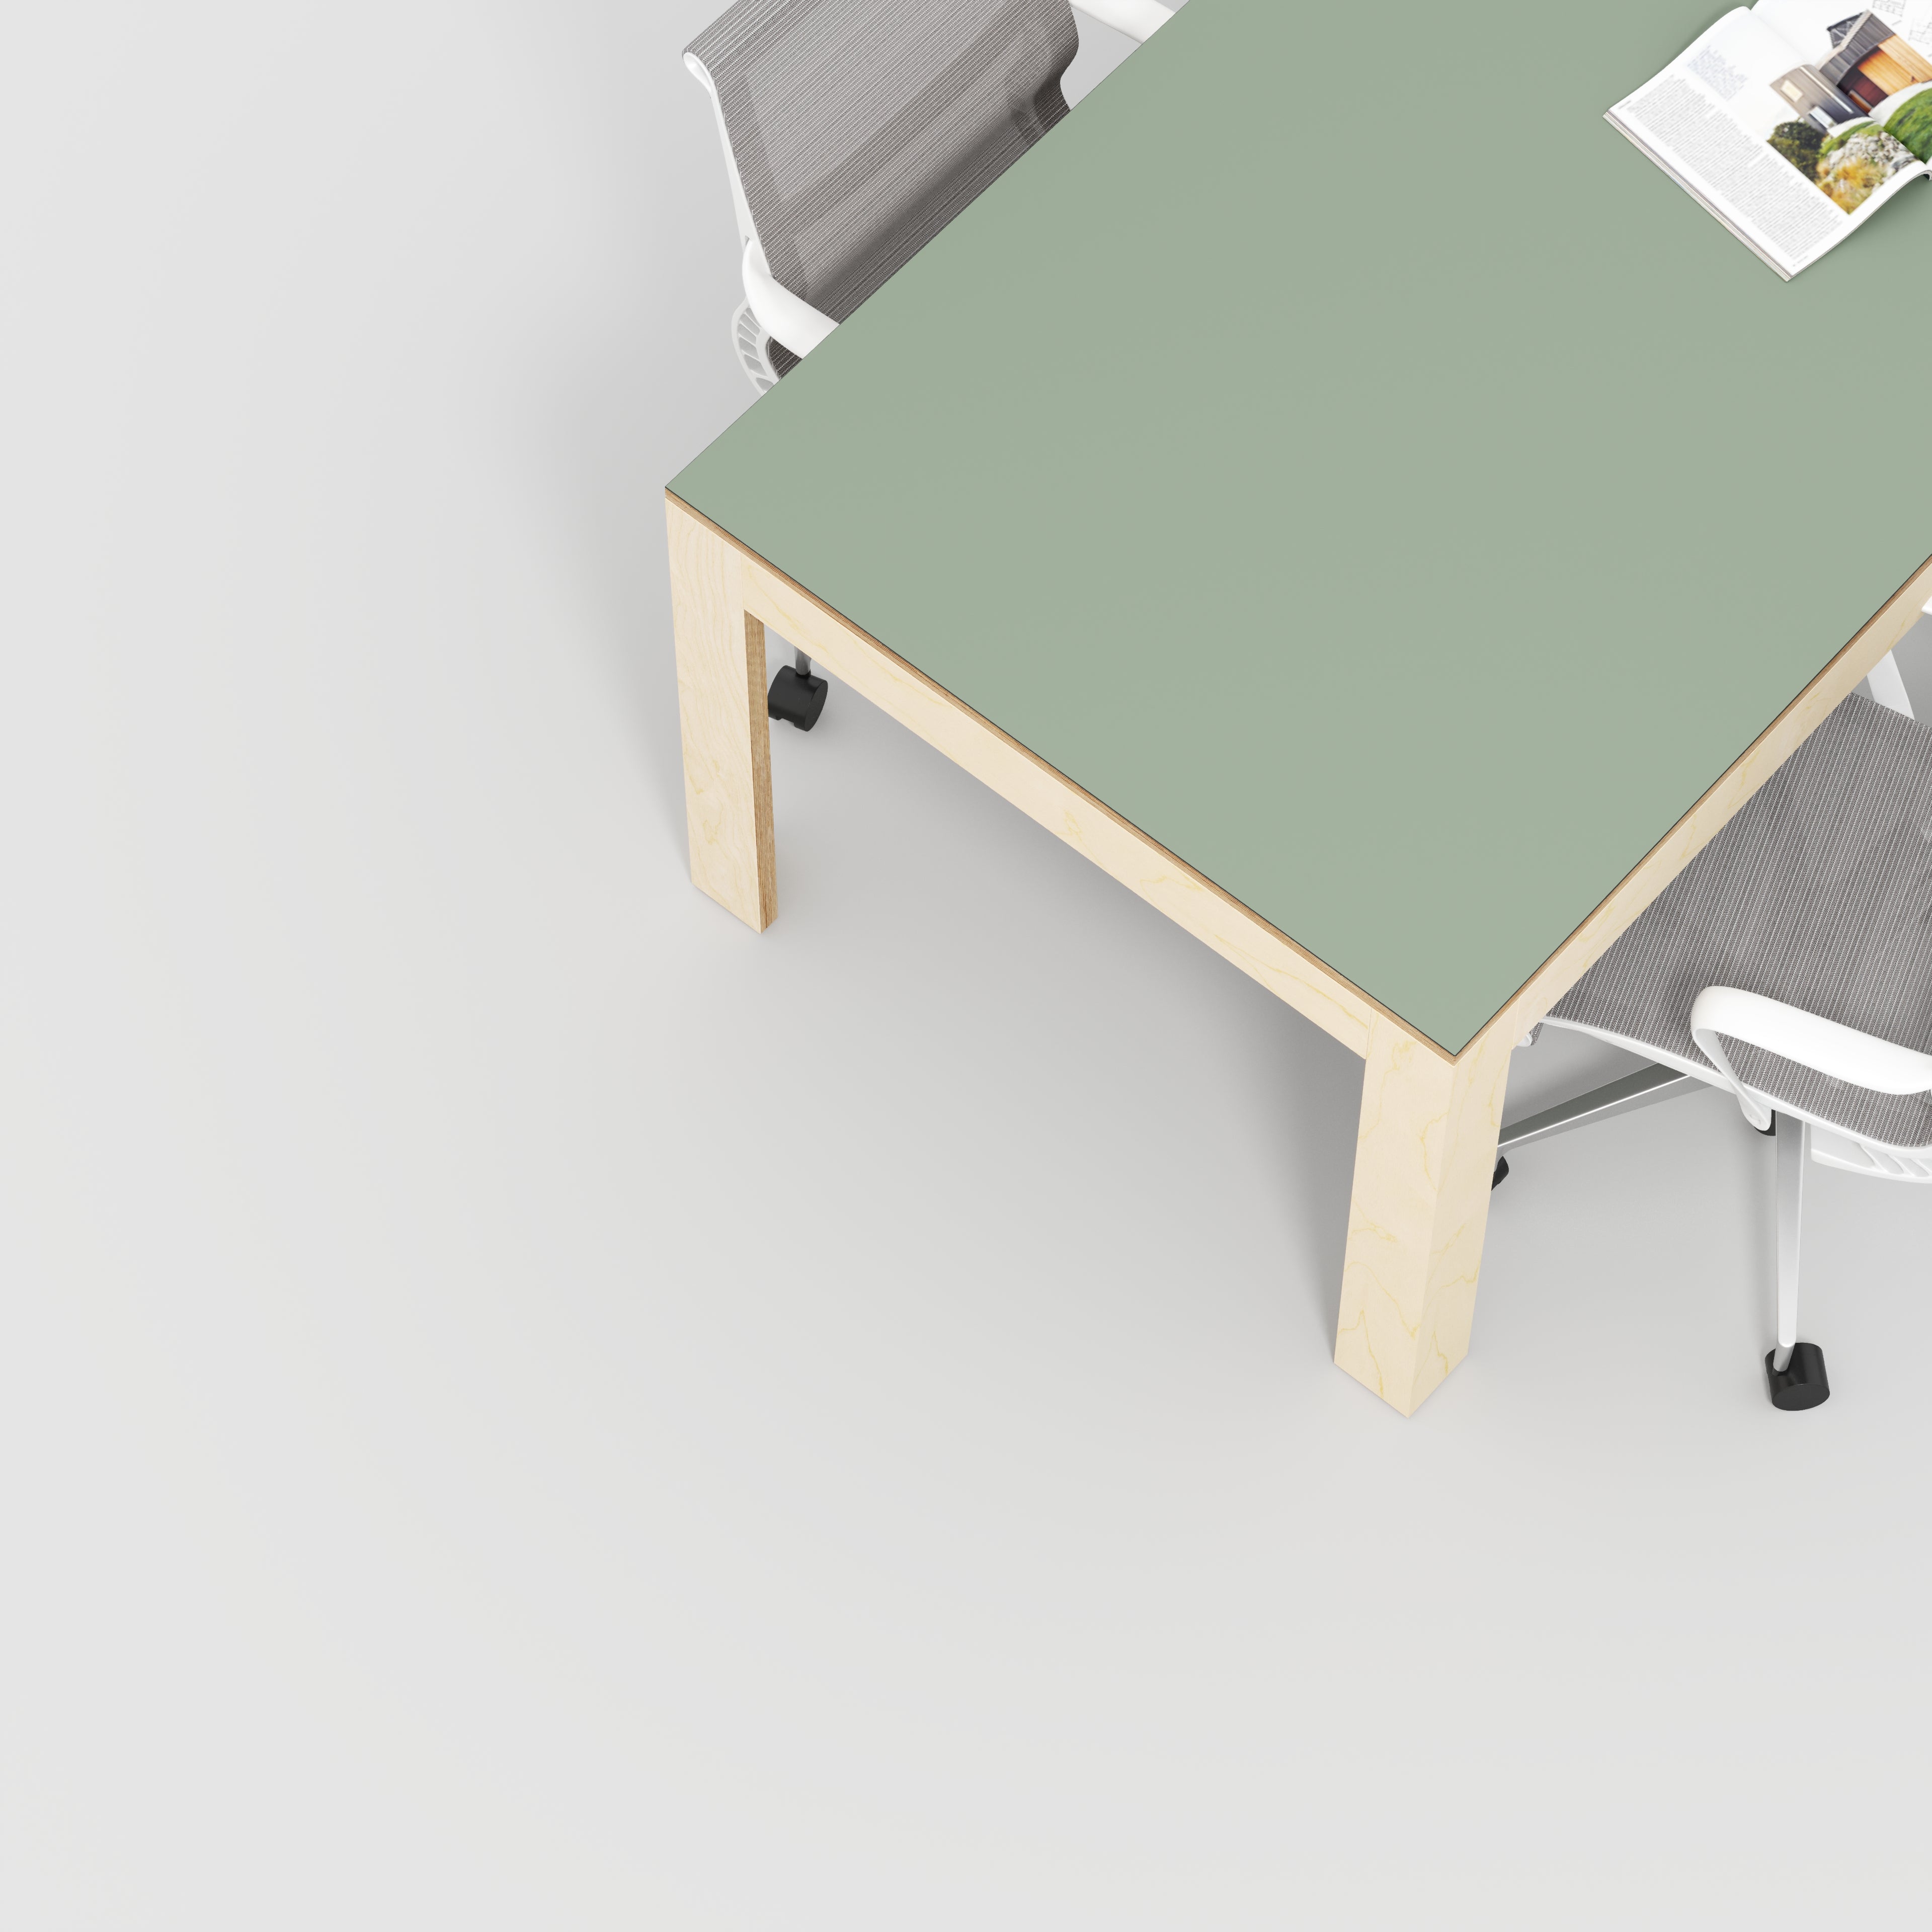 Table with Solid Frame - Formica Green Slate - 2000(w) x 1000(d) x 750(h)